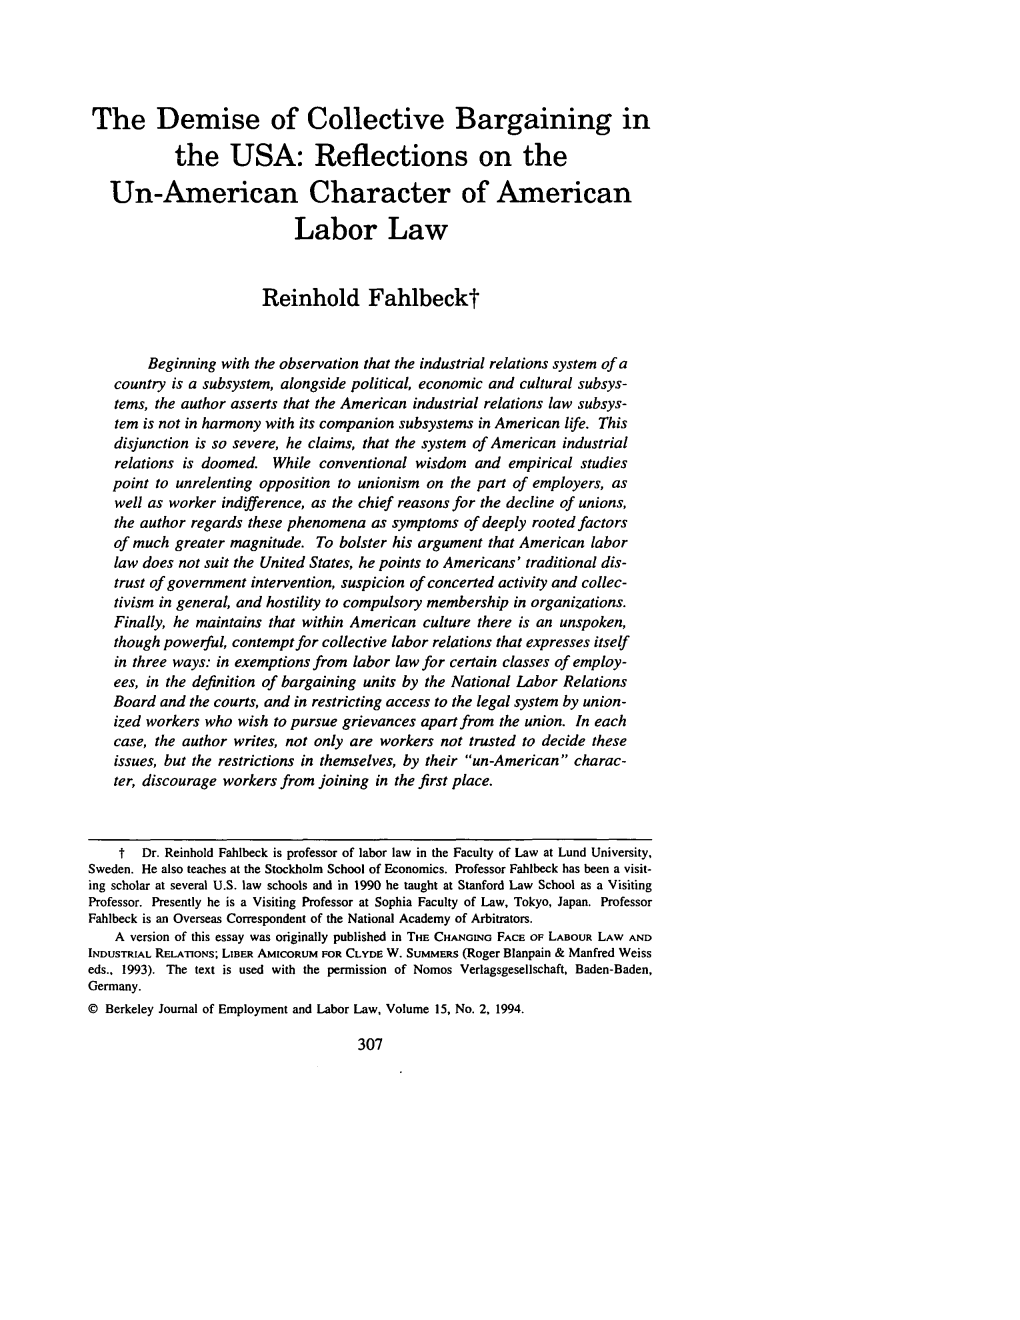 The Demise of Collective Bargaining in the USA: Reflections on the Un-American Character of American Labor Law